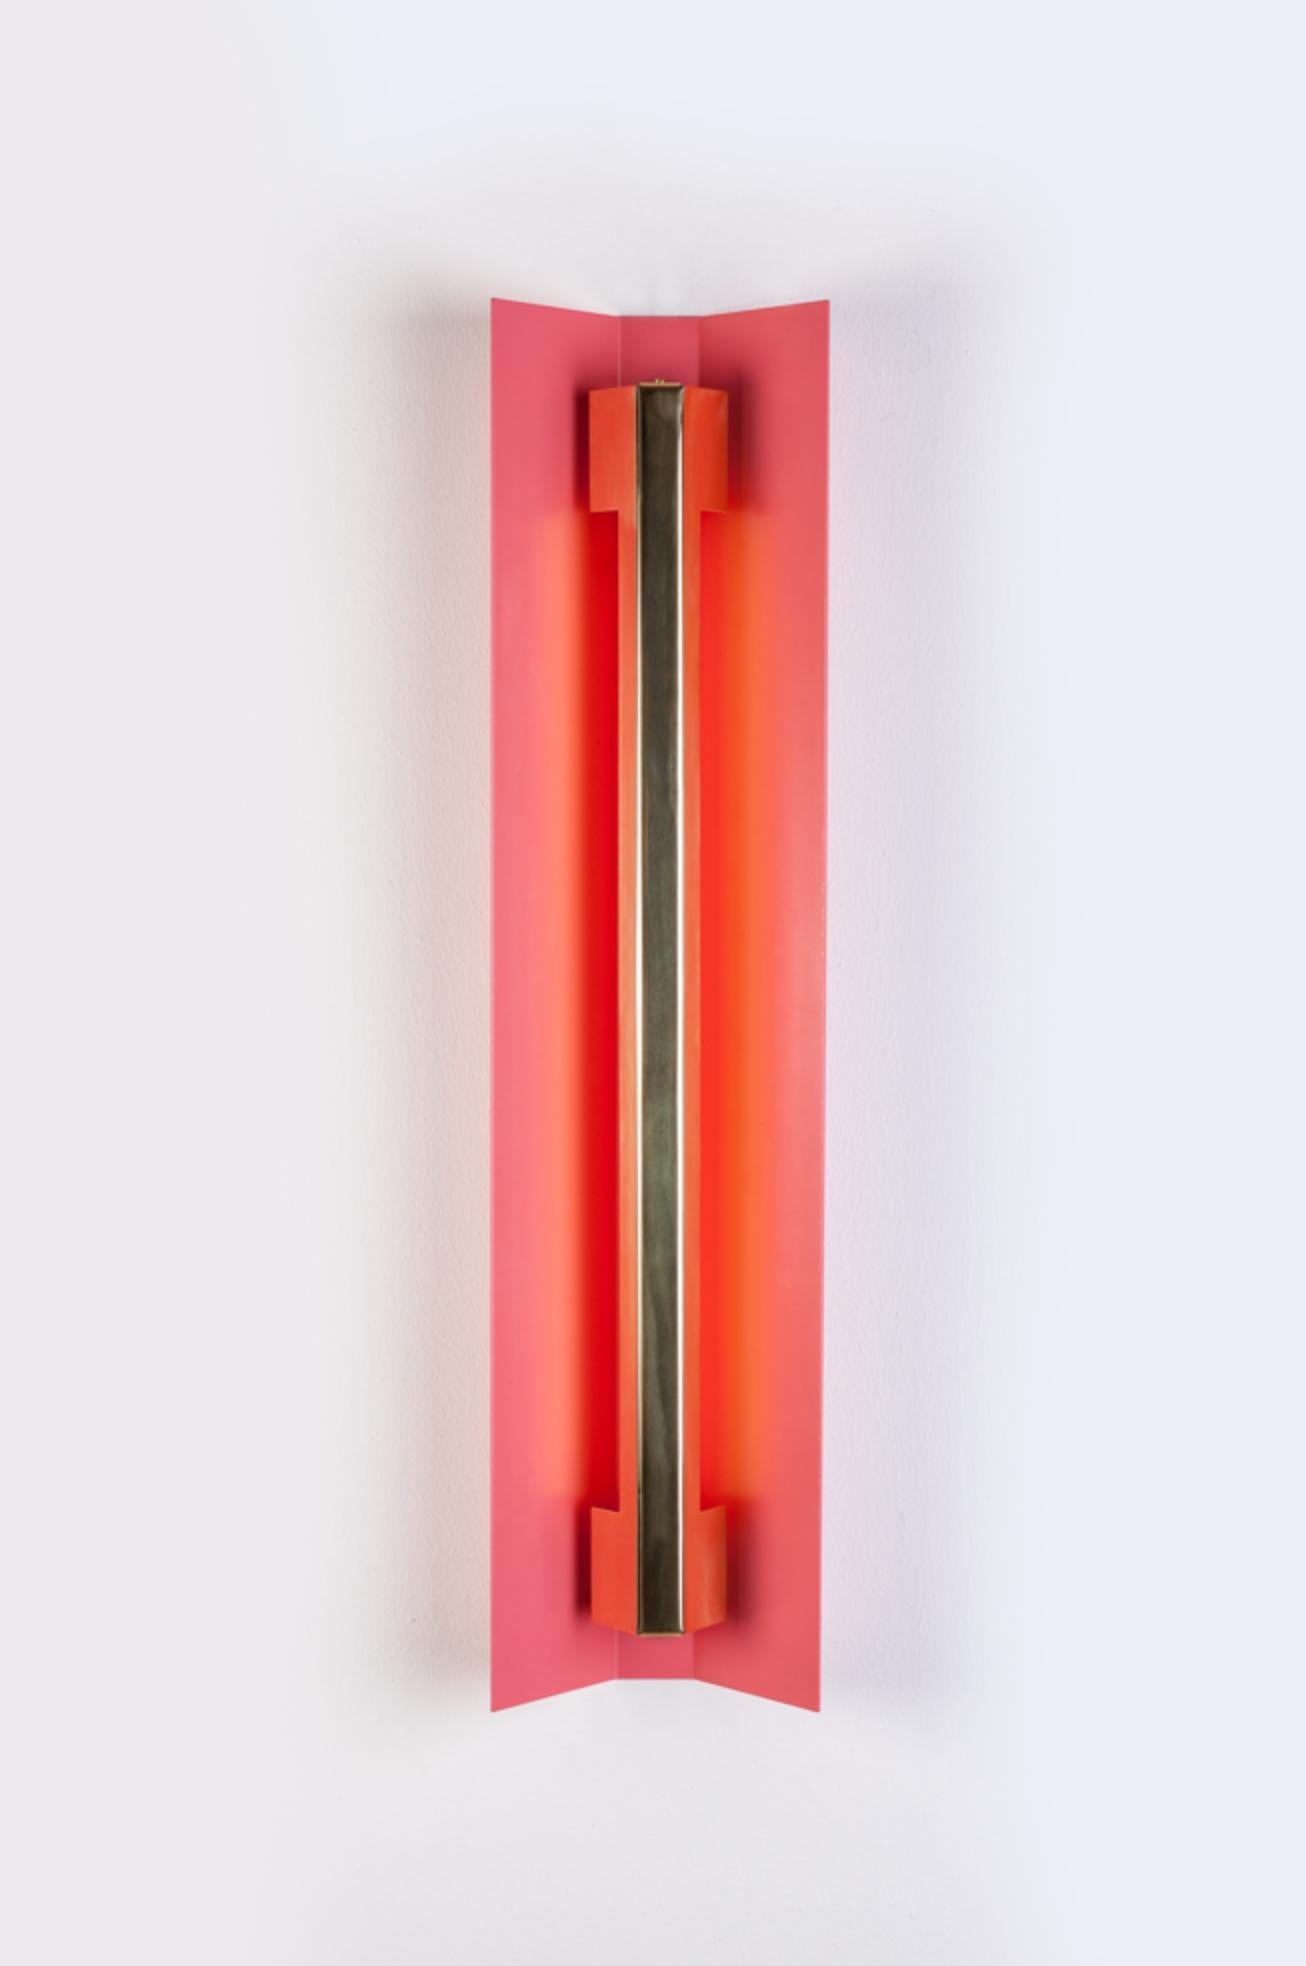 Small Misalliance Ex antique pink wall light by Lexavala
Dimensions: D 16 x W 70 x H 8 cm
Materials: powder coated shade with details made of brass or stainless steel.

There are two lenghts of socket covers, extending over the LED. Two short